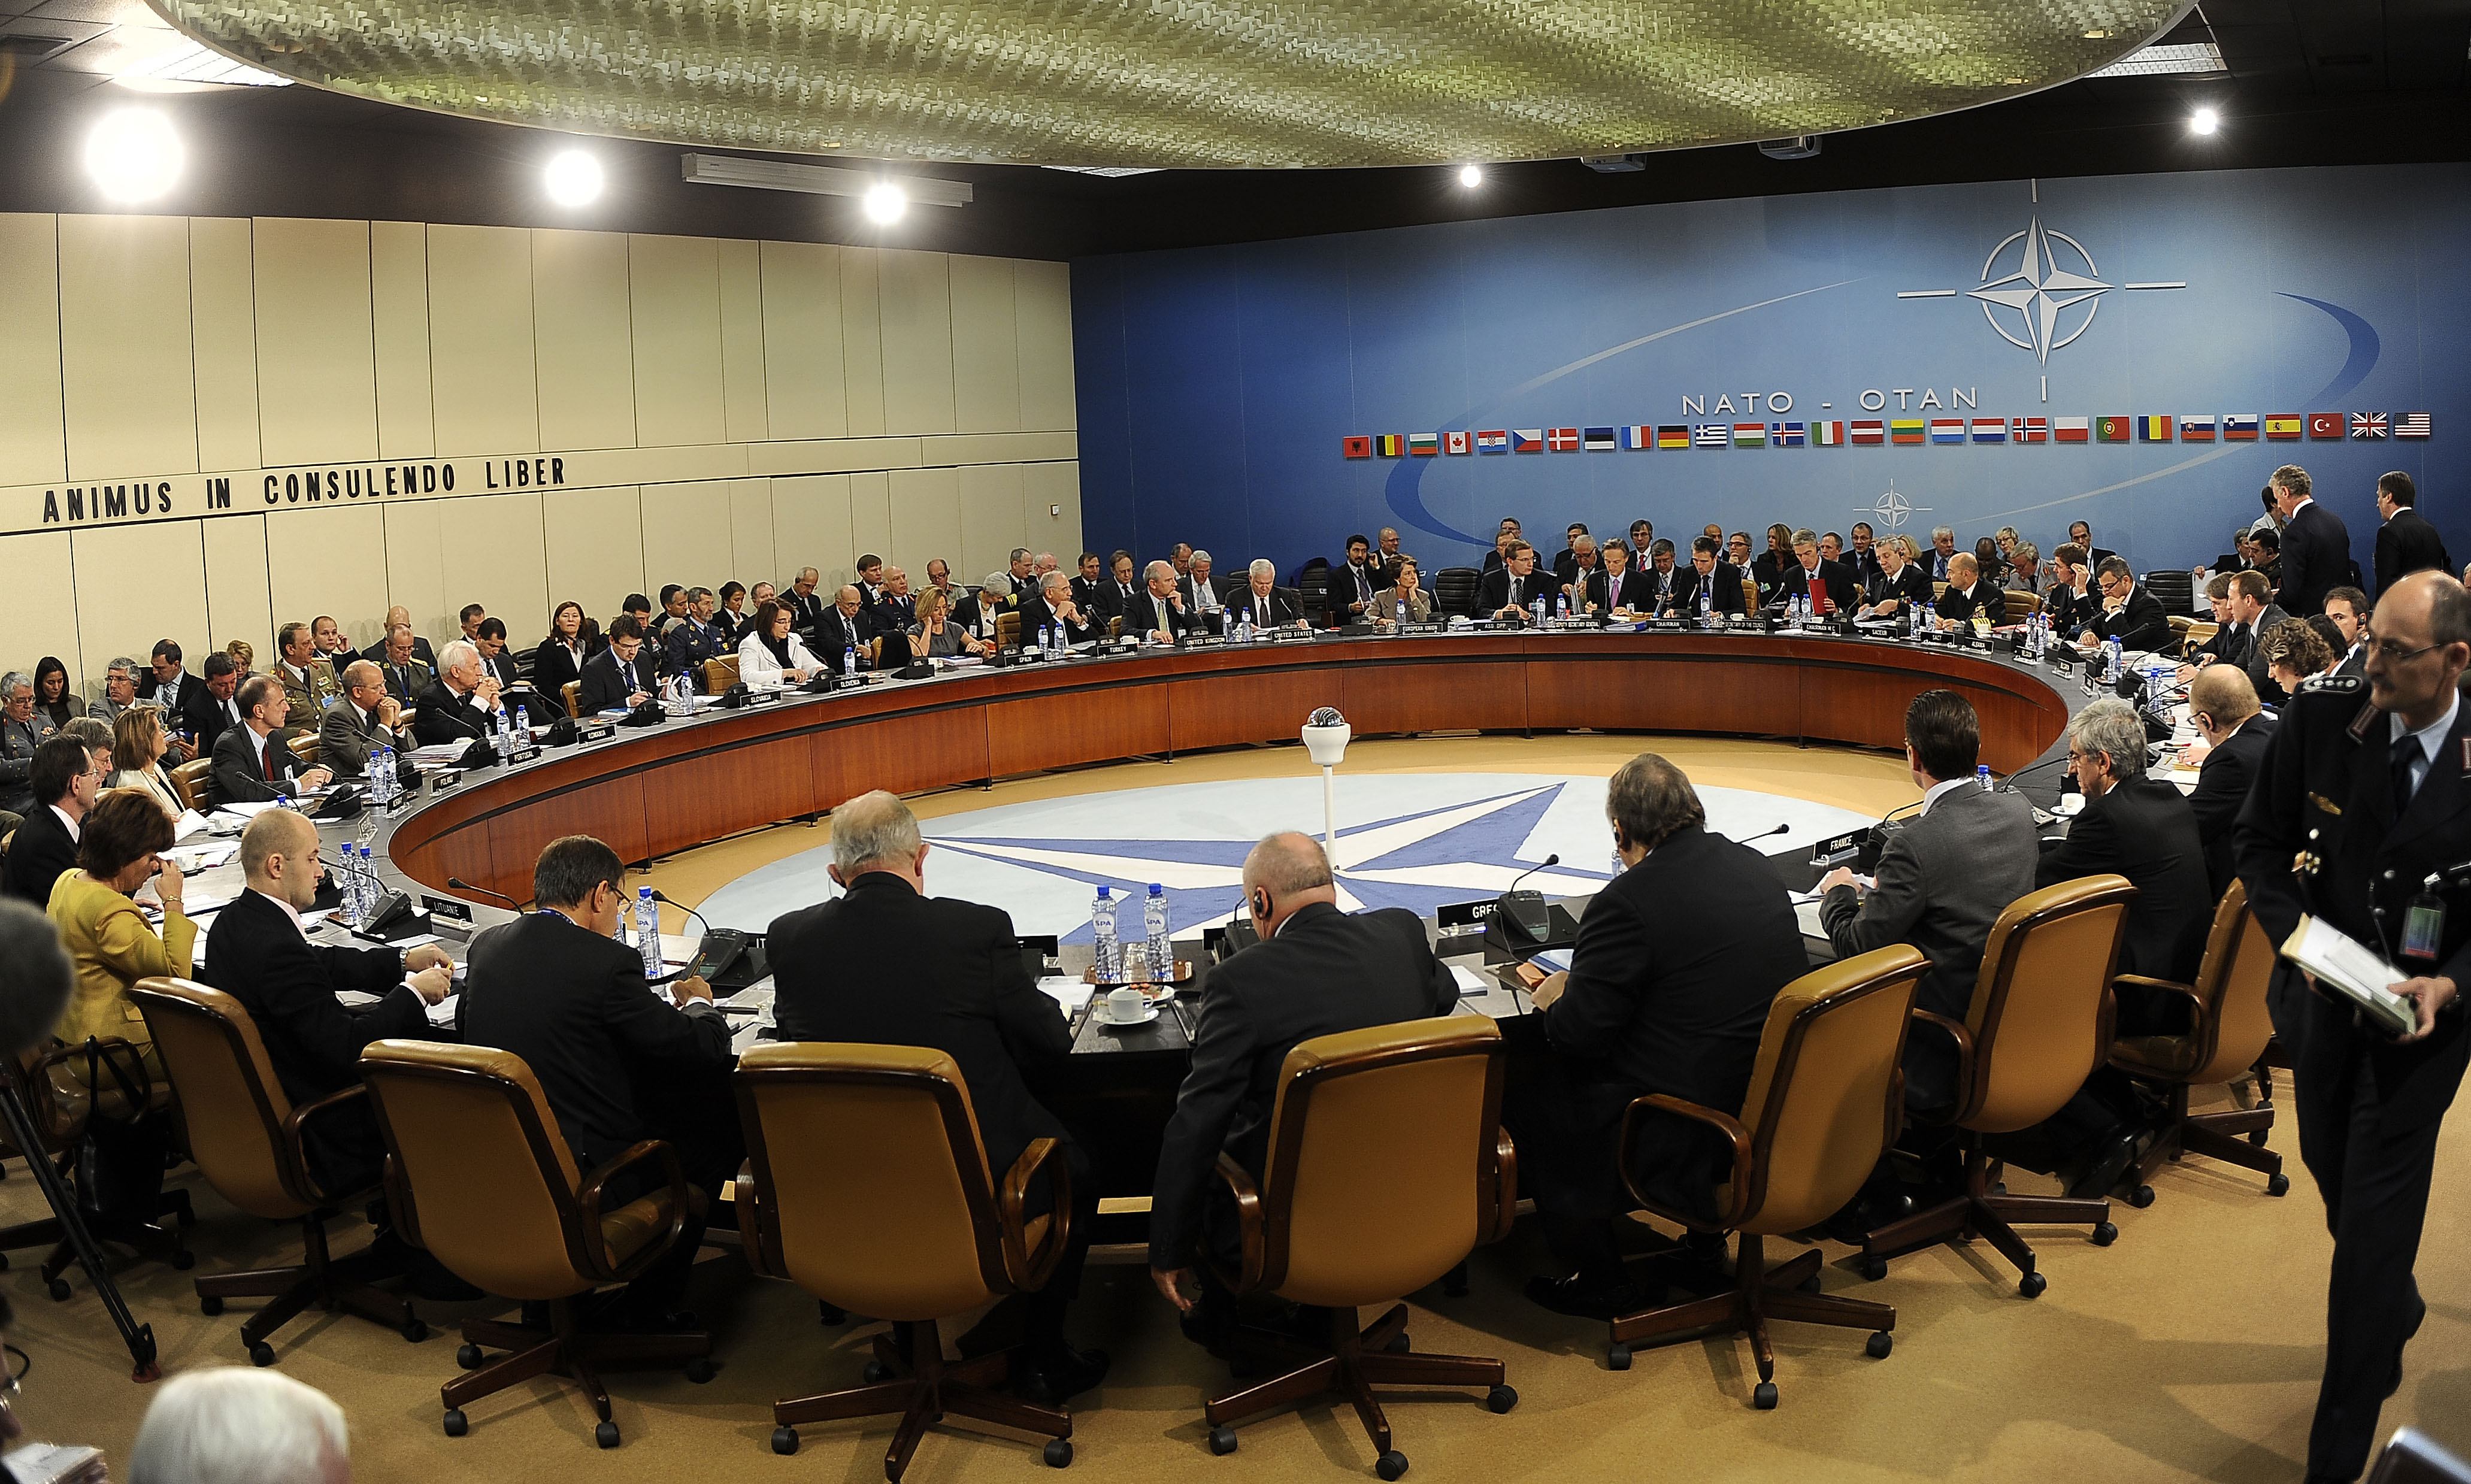 Defense.gov_News_Photo_101014-F-6655M-004_-_Secretary_of_Defense_Robert_M._Gates_and_other_NATO_Ministers_of_Defense_and_of_Foreign_Affairs_meet_together_at_NATO_headquarters_to_give_final.jpg